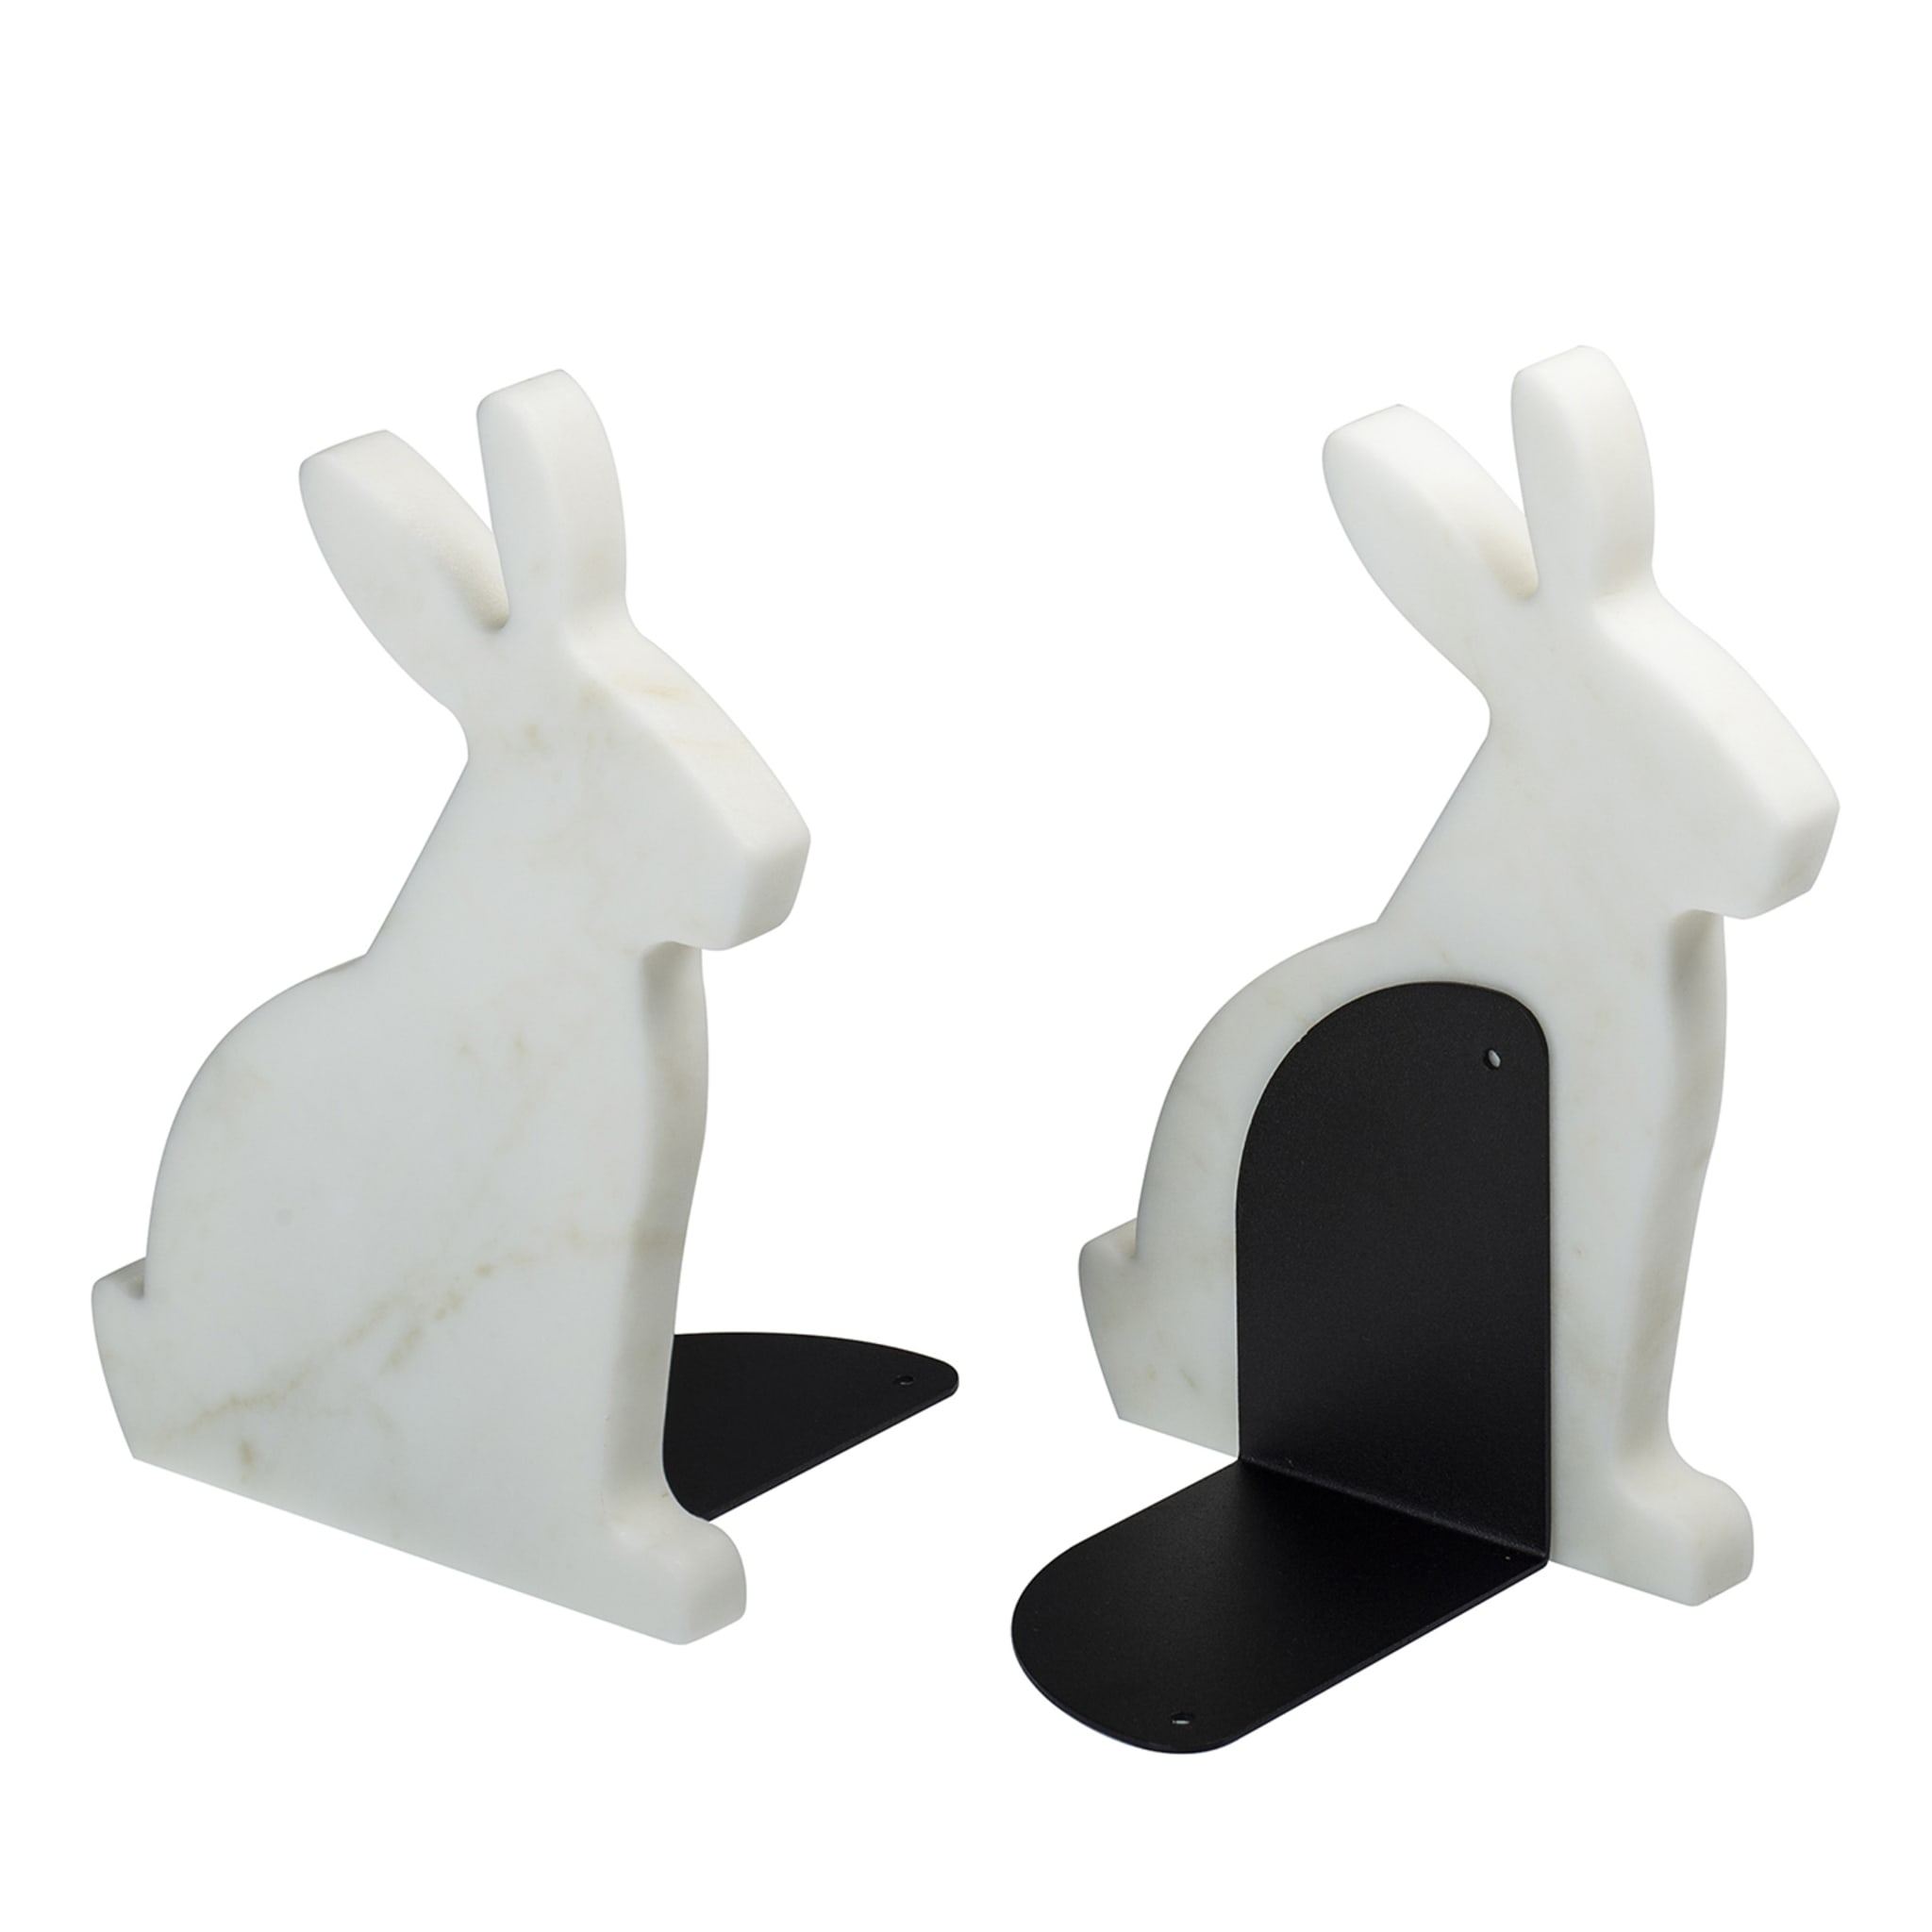 Bunny Set of 2 White Carrara Bookends by Alessandra Grasso - Main view